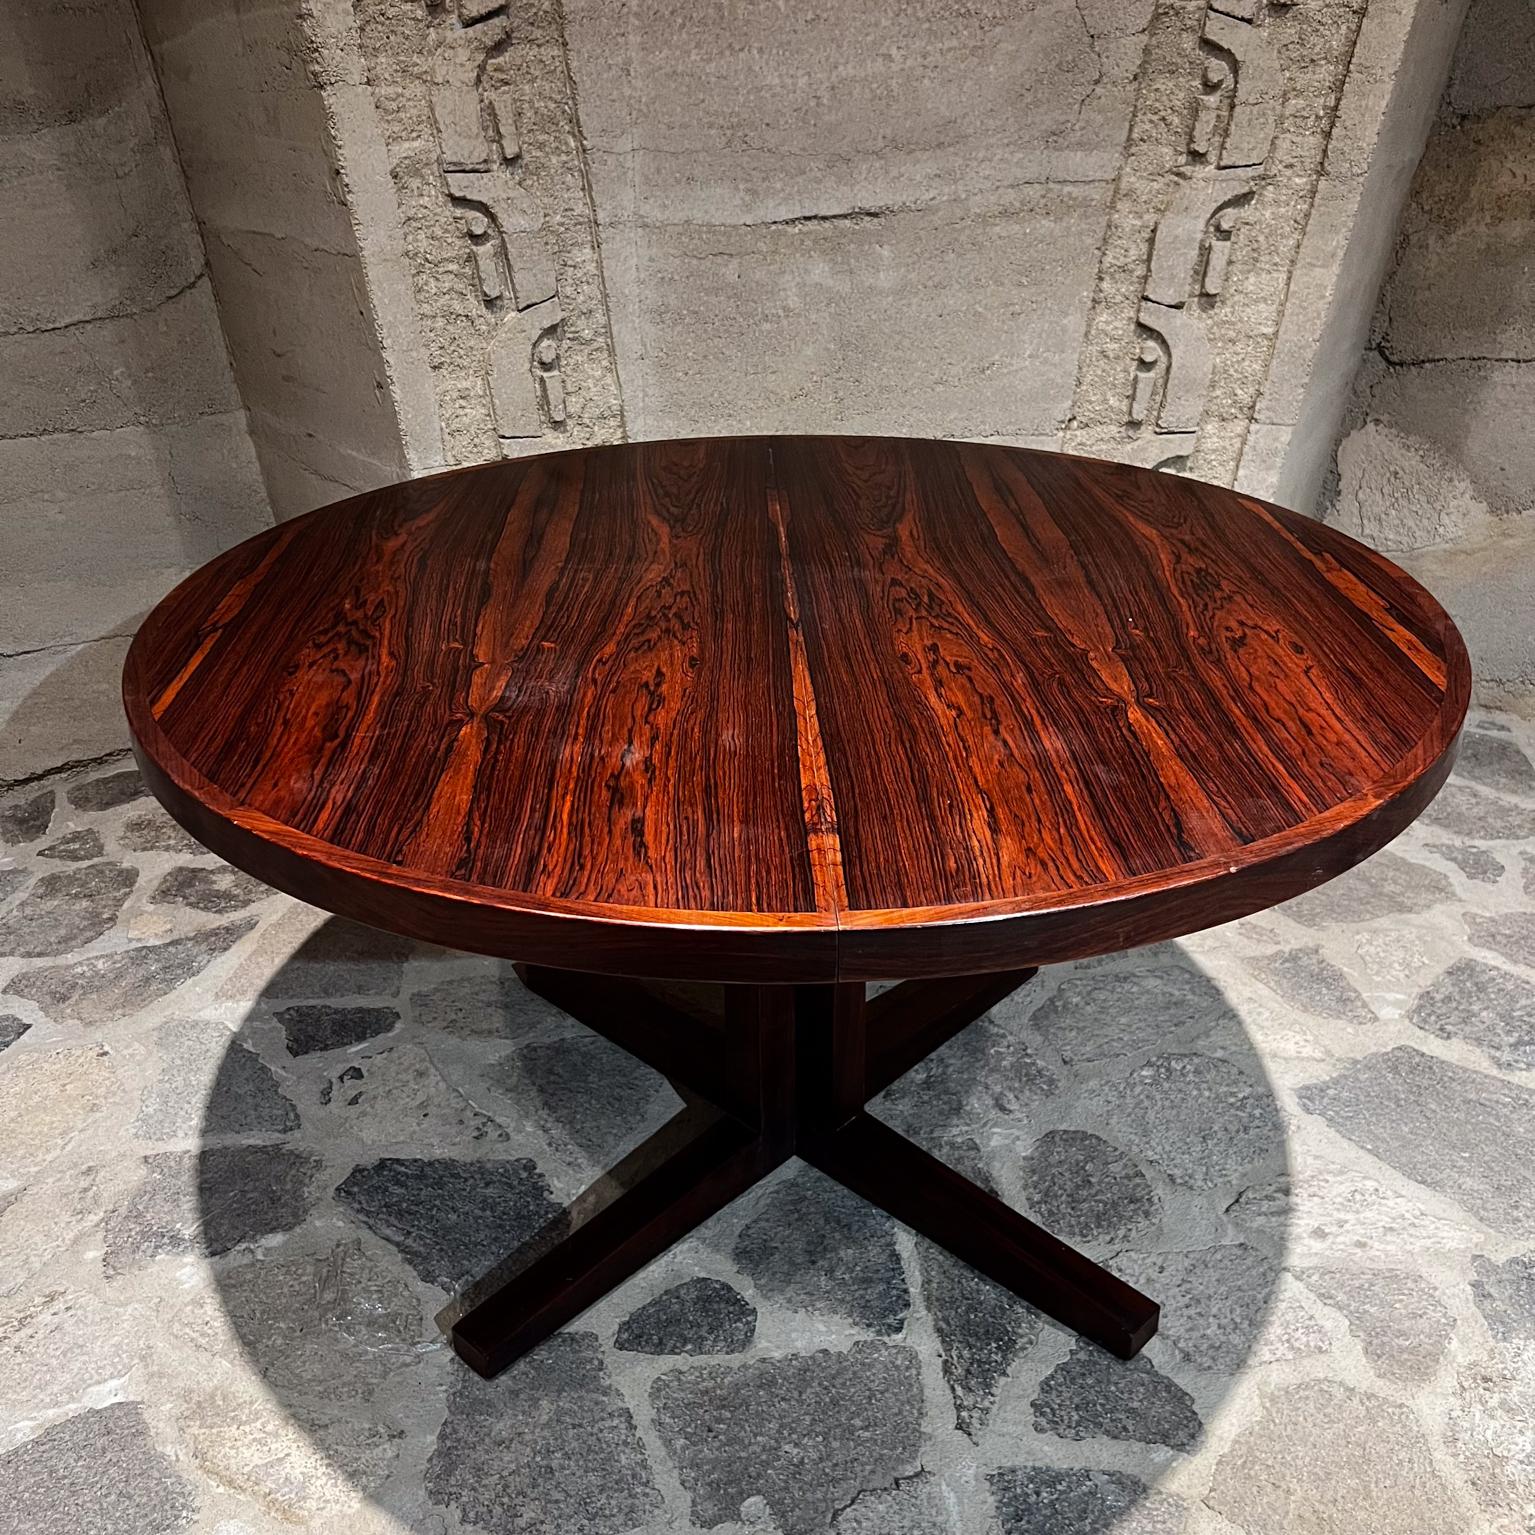 Danish Modern 1970s Scandinavian Rosewood Extendable Dining Table.
Attribution Dyrlund unsigned
Solid wood legs. Round top in plywood book matched rosewood veneer.
Clean modern design. Table has two extensions. Functions round to large oval.
51